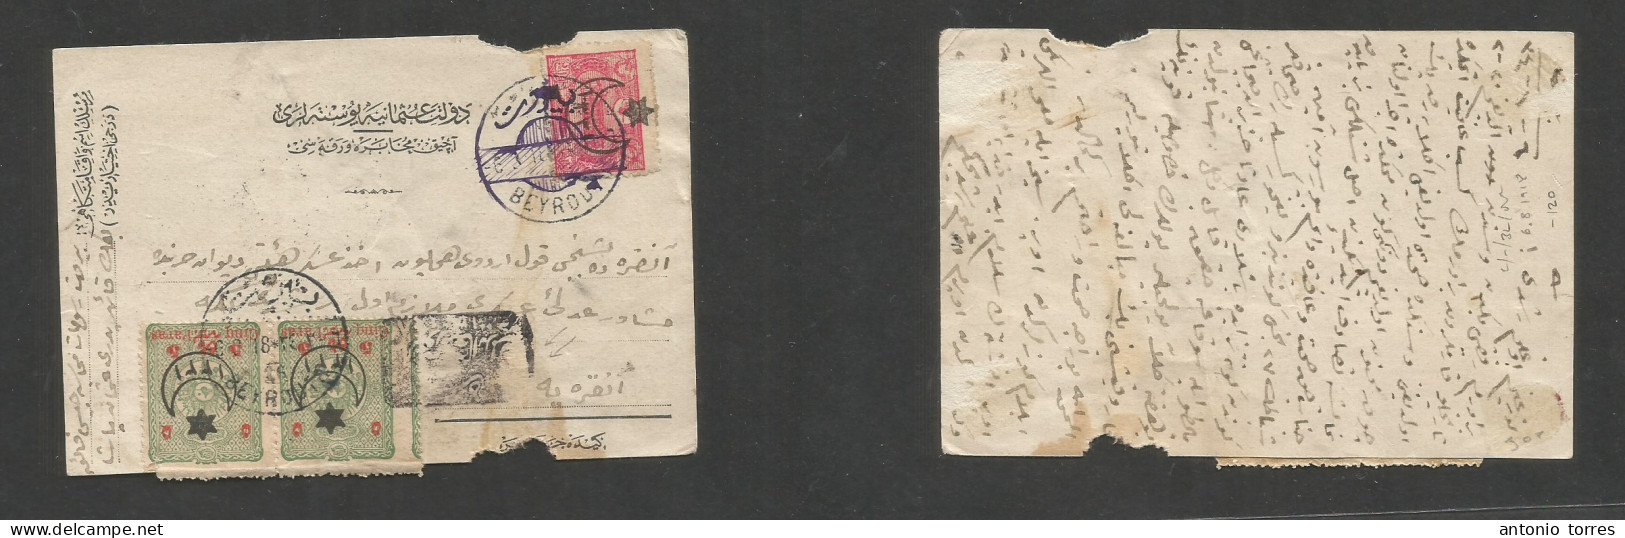 Lebanon. 1918 (6 Aug) Turkish PO, Beyrouth, Local Multifkd Private Card. Late WWI Period Usage + Censor Cachet. Scarce I - Líbano